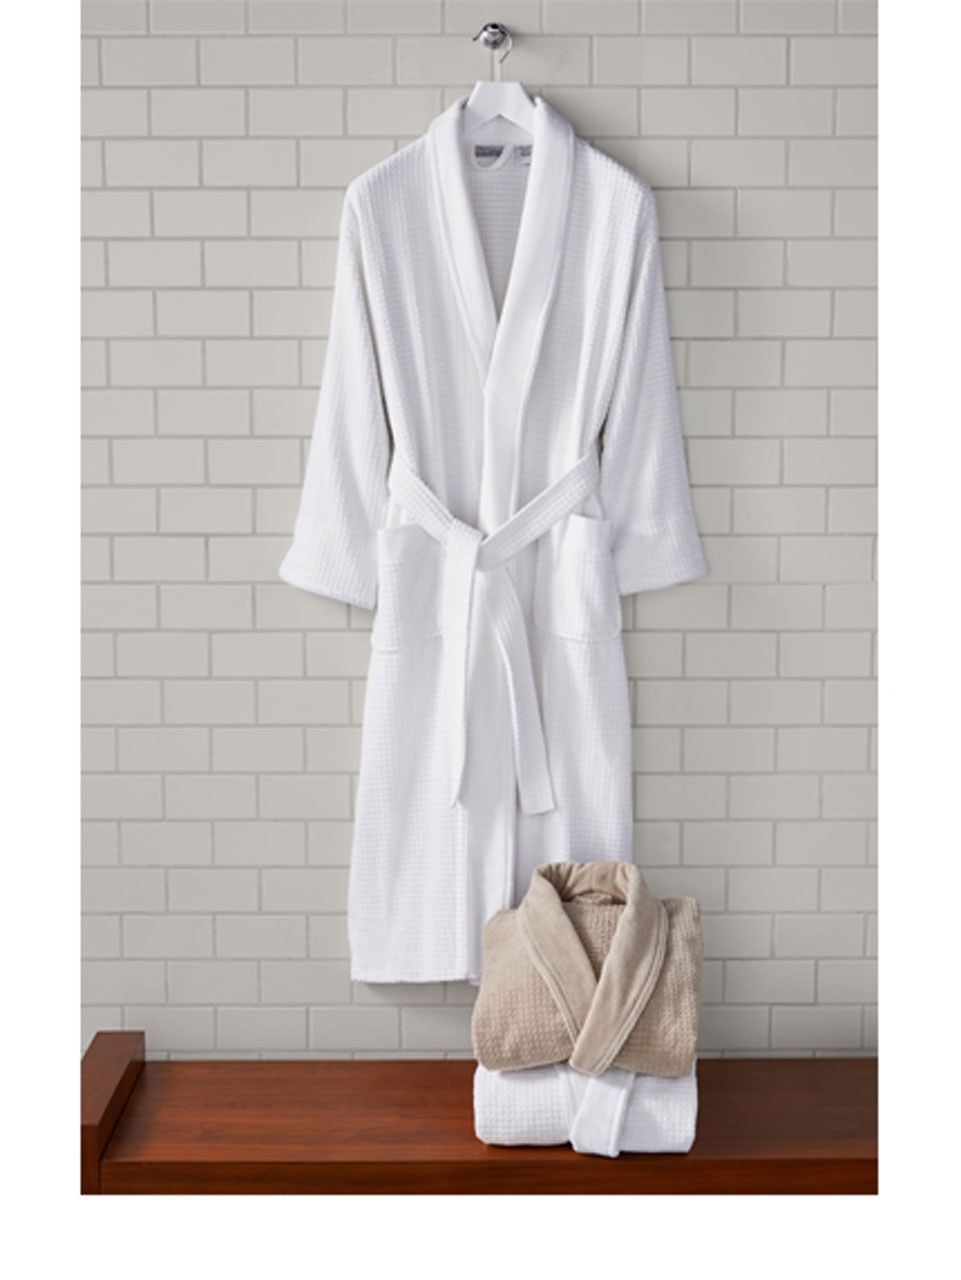 Is the 1concier robe, specifically the Platinum Shawl Collar Robe, made from what material?